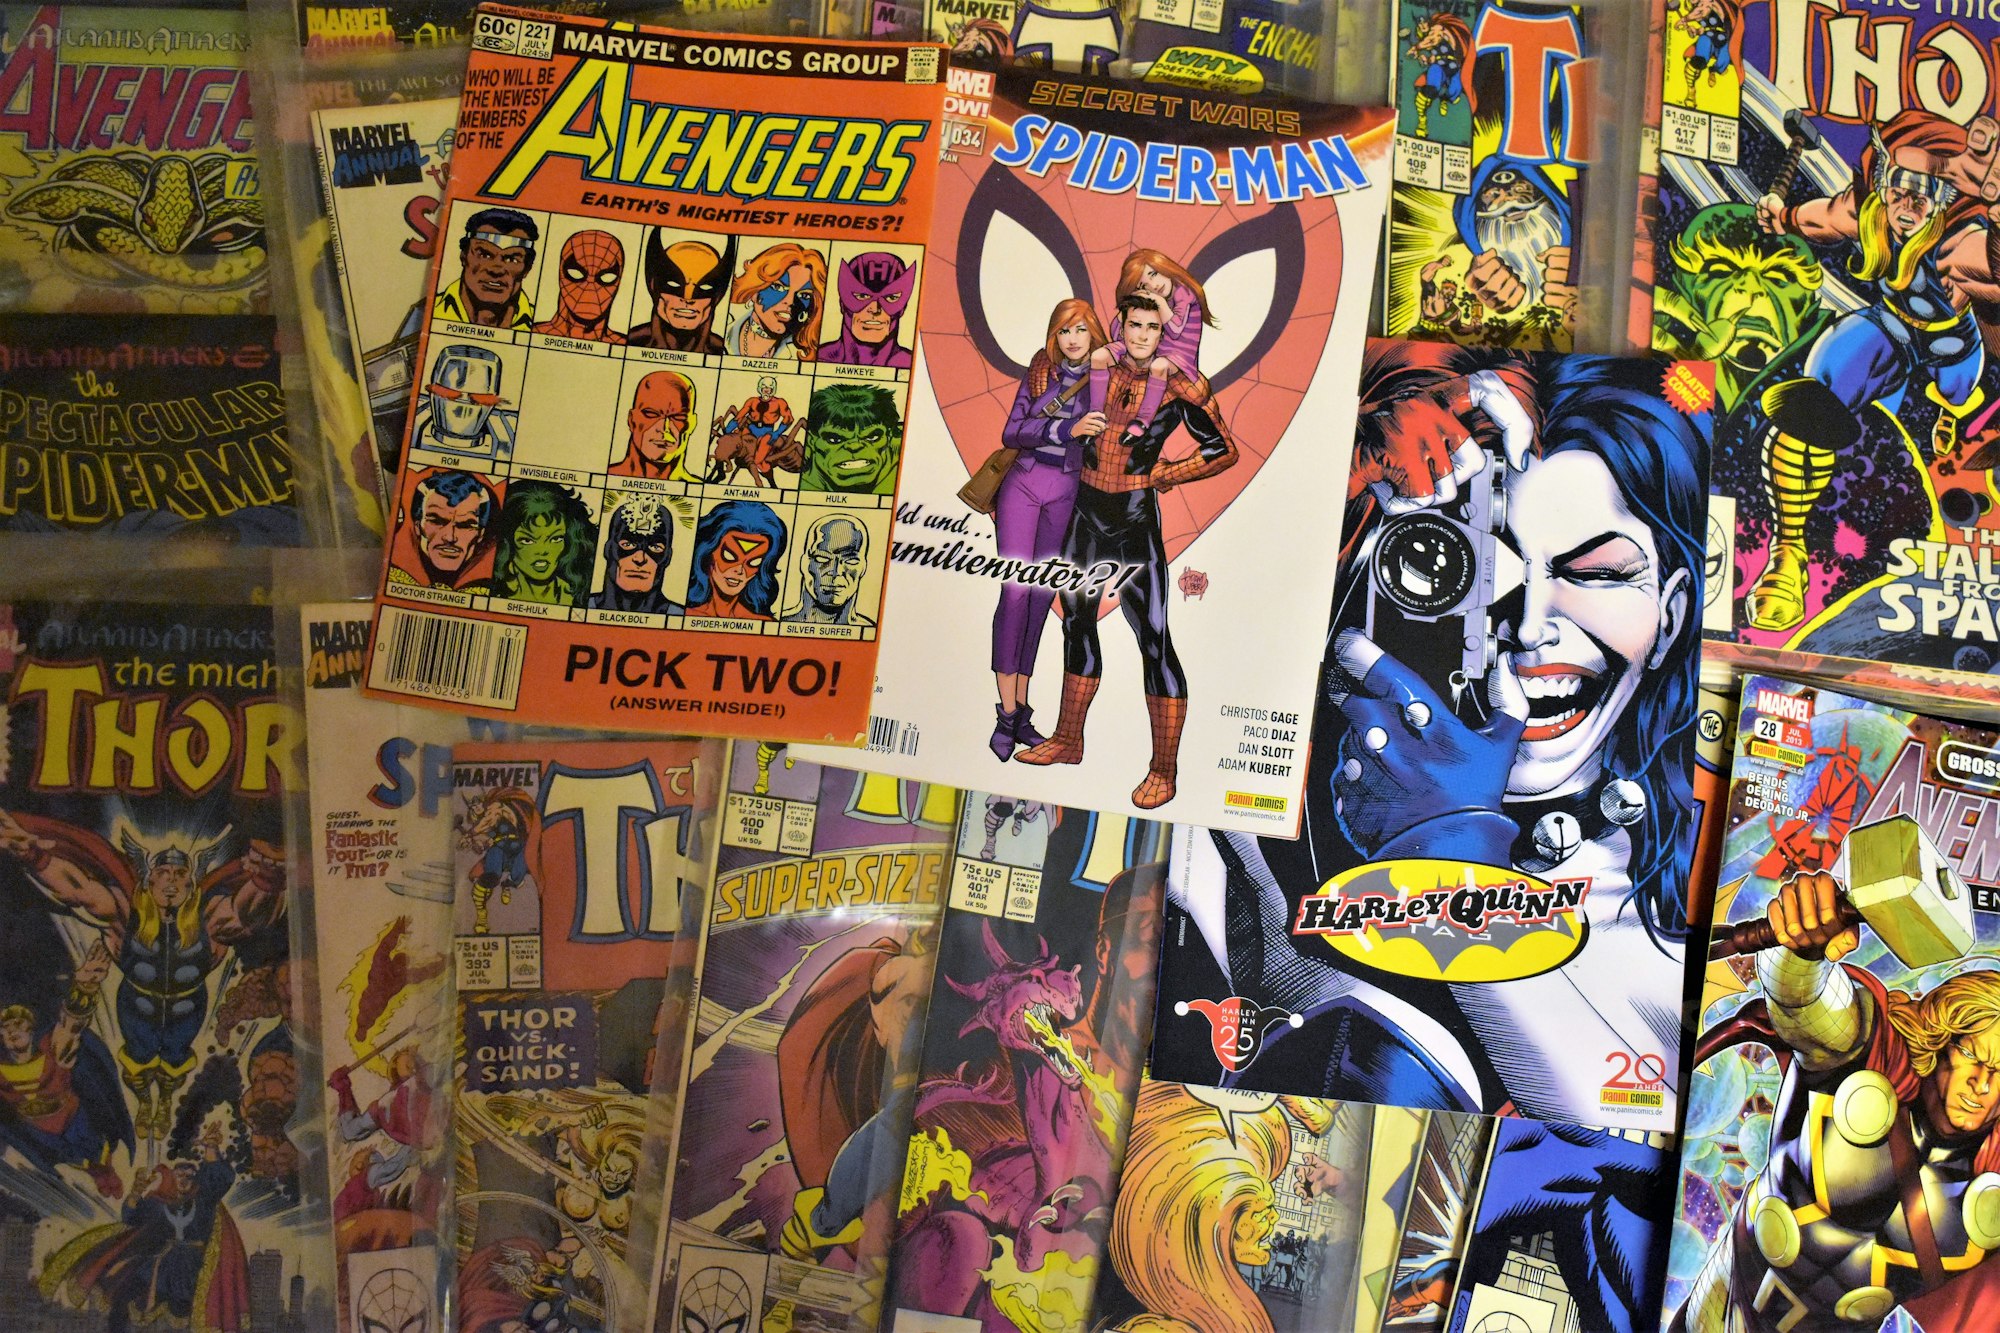 Comic Books From The Past in My Private Own Comic Shop Basement